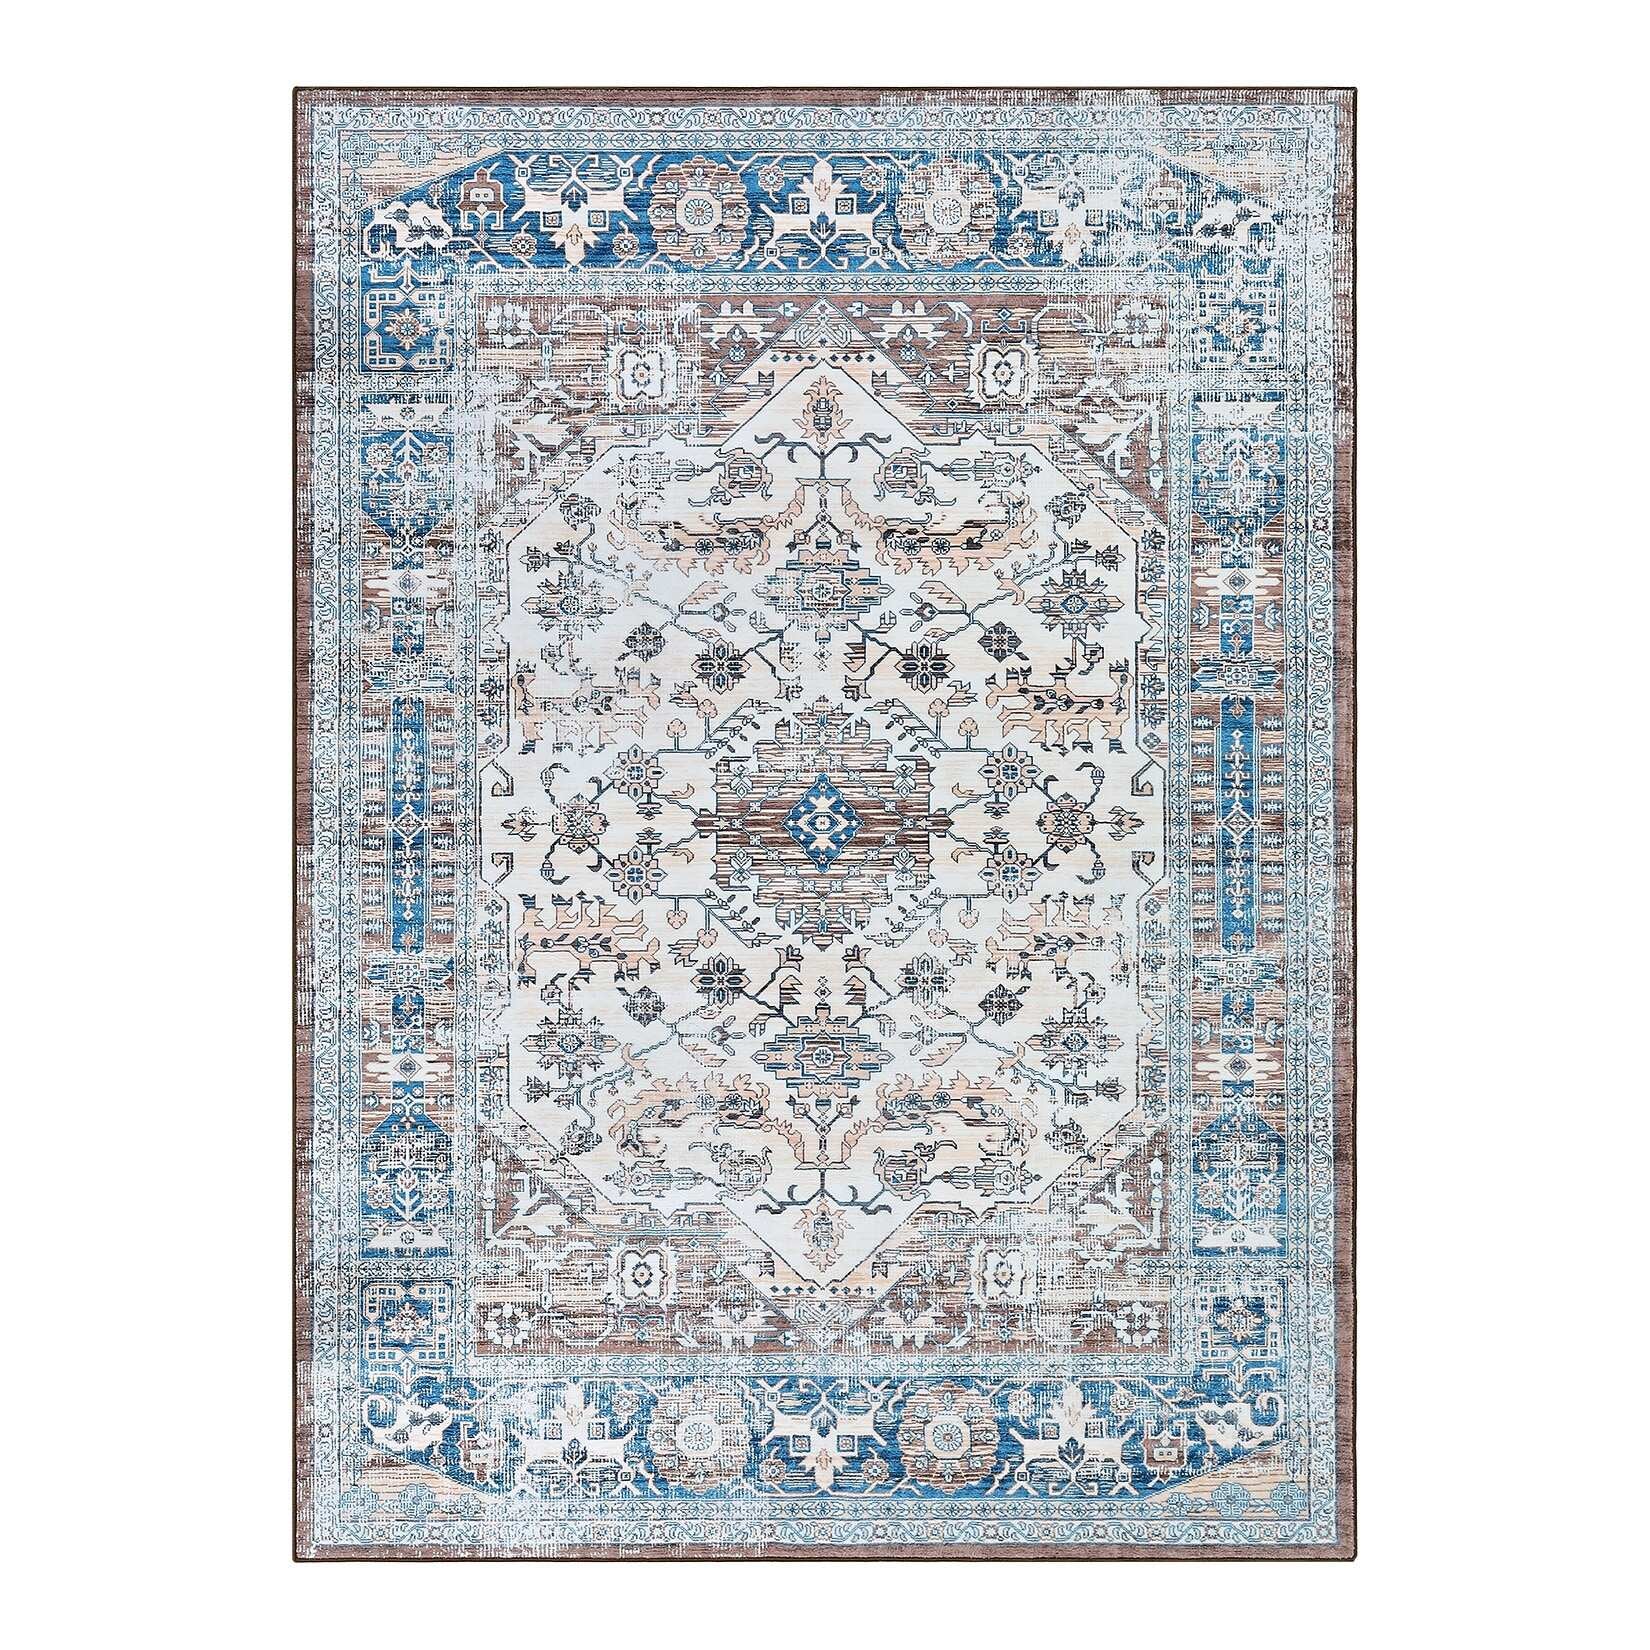 Glowsol Area Rugs Distressed Vintage Accent Carpet for Living Room Washable Rug